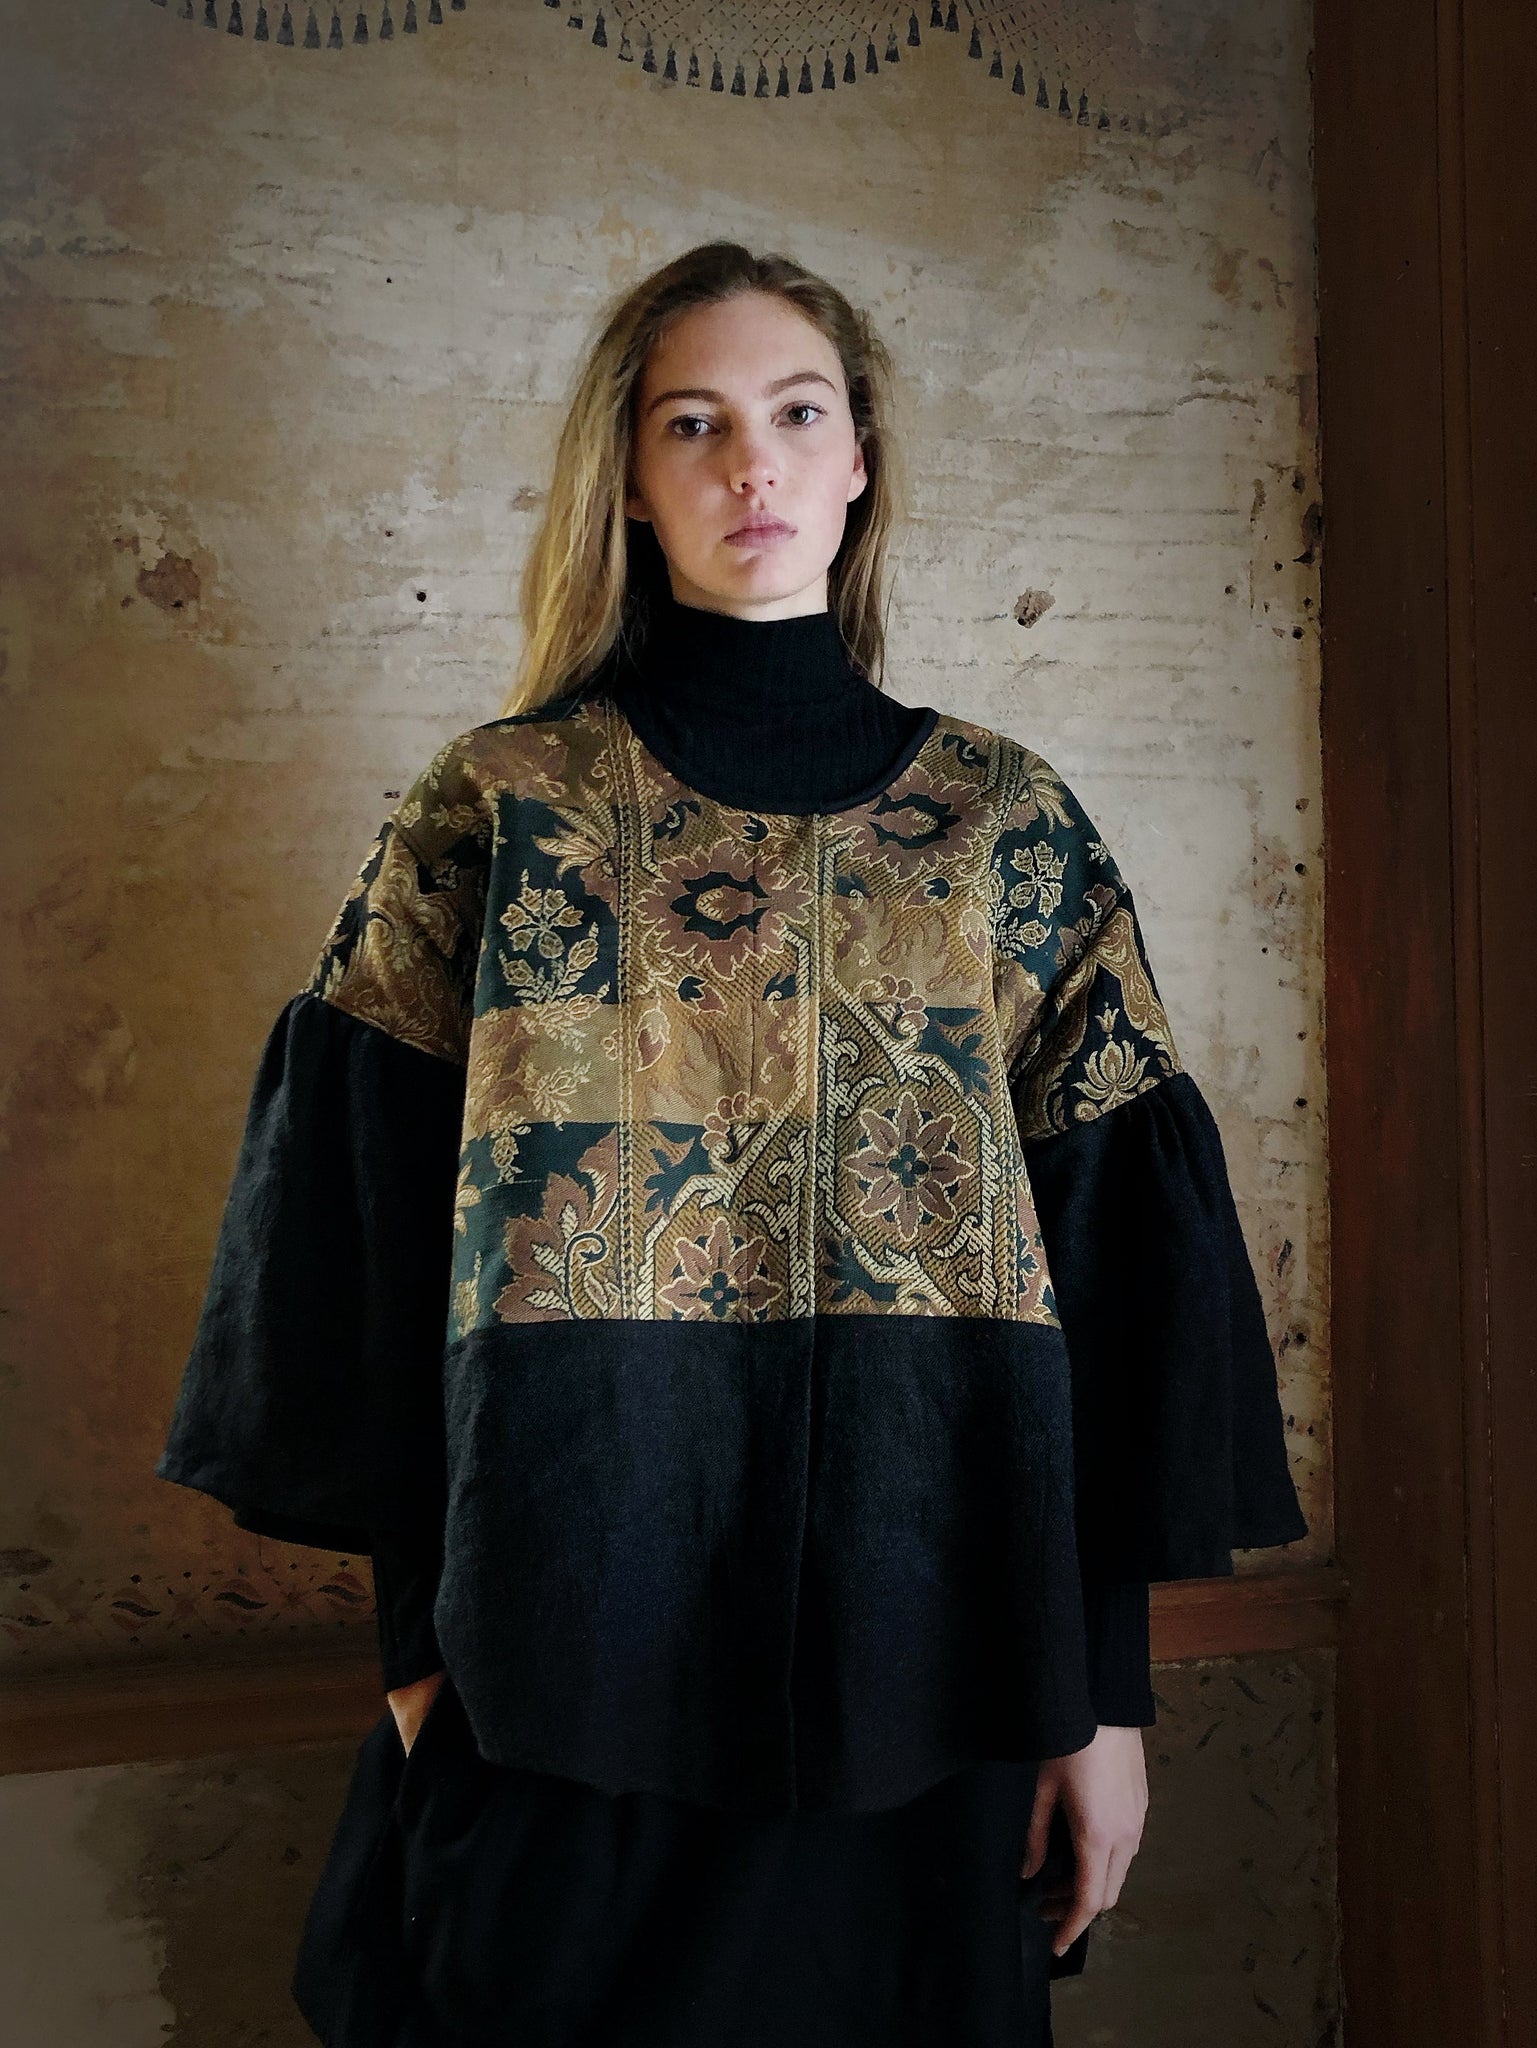 19th century jacobean french jacquards patched big shirt